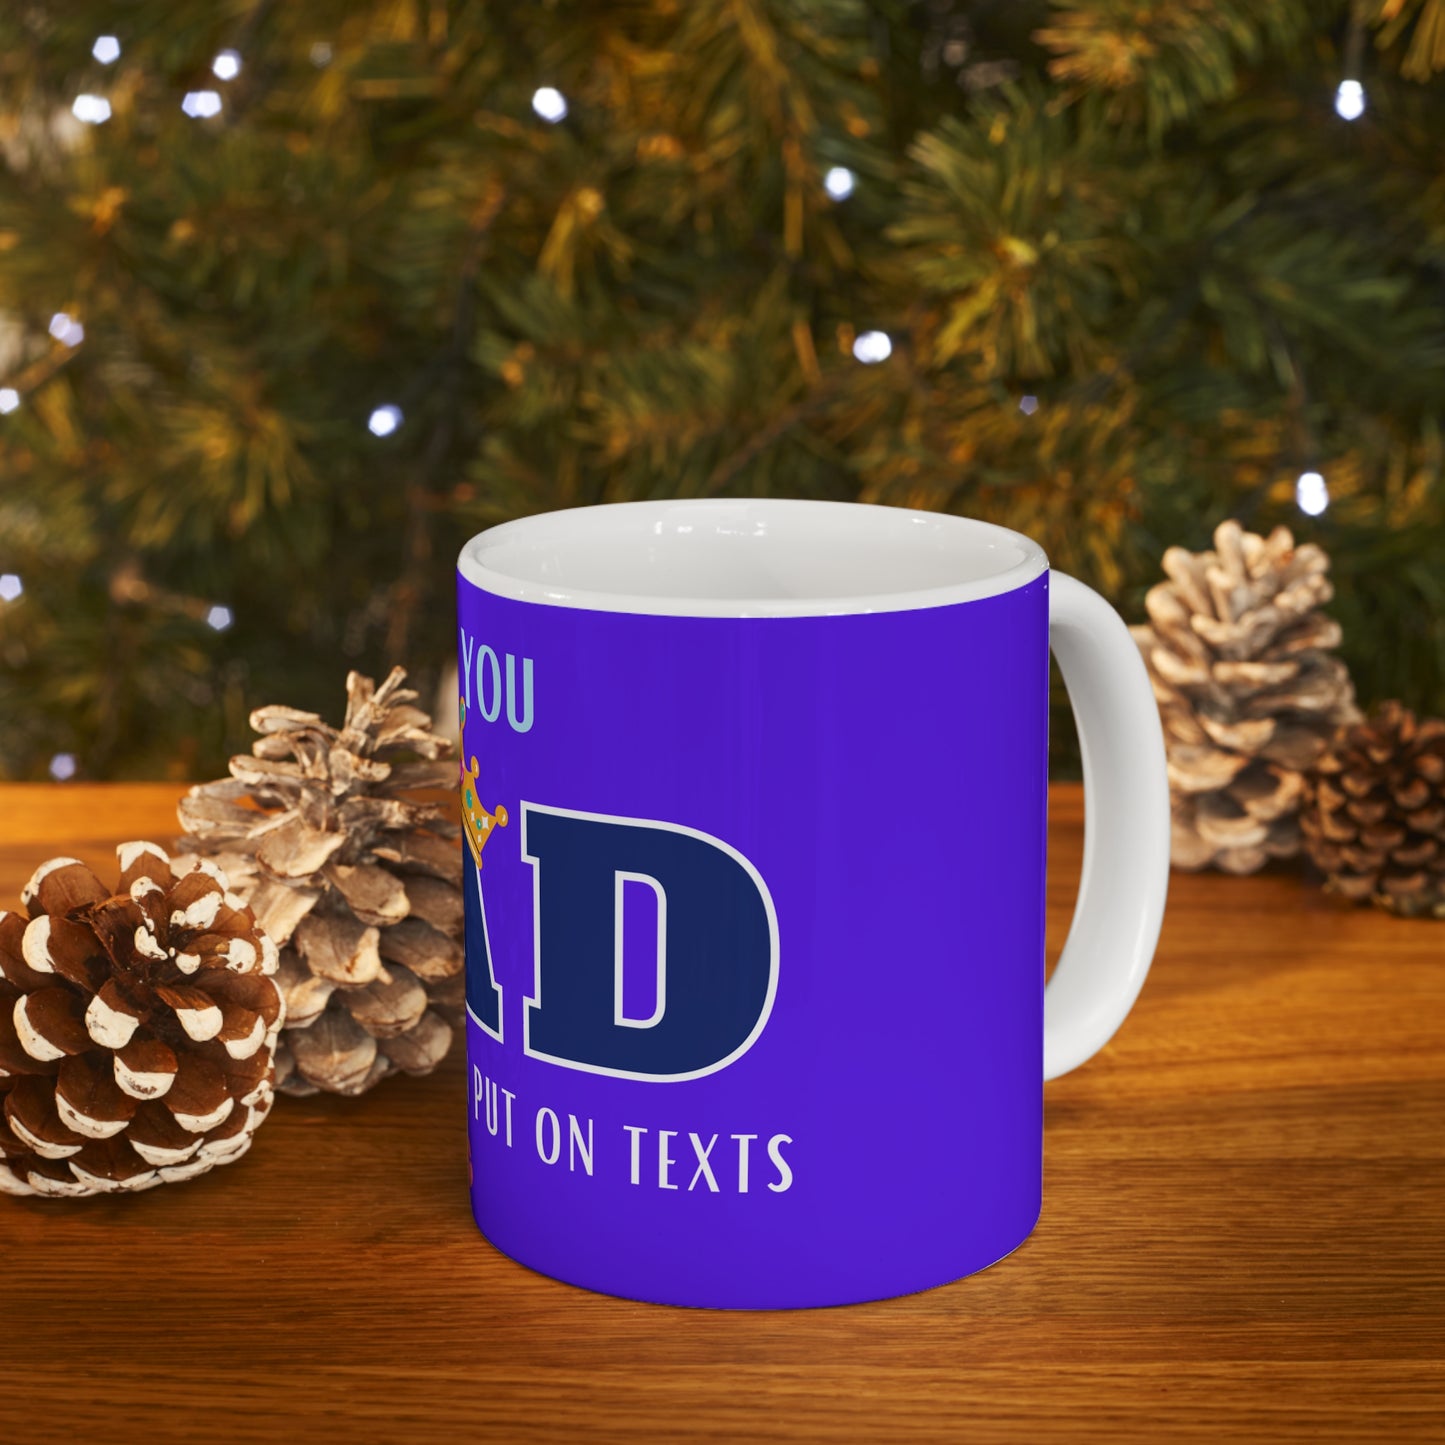 “I LOVE YOU DAD MORE THAN I CAN PUT ON TEXTS” coffee mug for that special dad. Texts are limited that way.